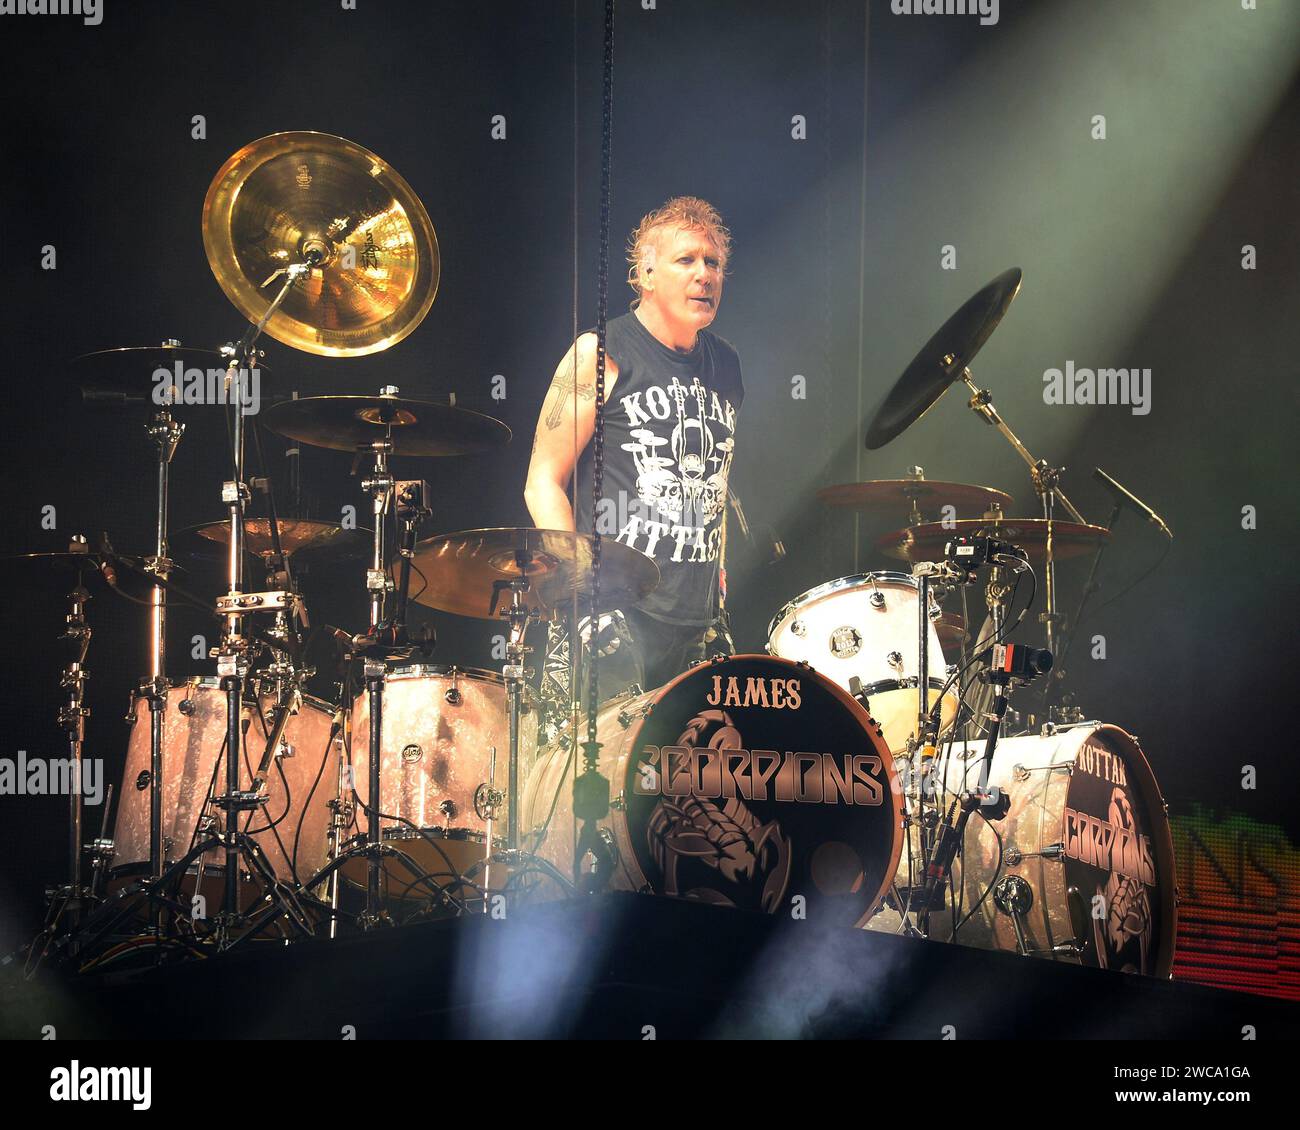 Brooklyn, United States Of America. 12th Sep, 2015. NEW YORK, NY - SEPTEMBER 12: James Kottak of Scorpions performs at the Barclays Center on September 12, 2015 in the Brooklyn borough of New York City. People: James Kottak Credit: Storms Media Group/Alamy Live News Stock Photo